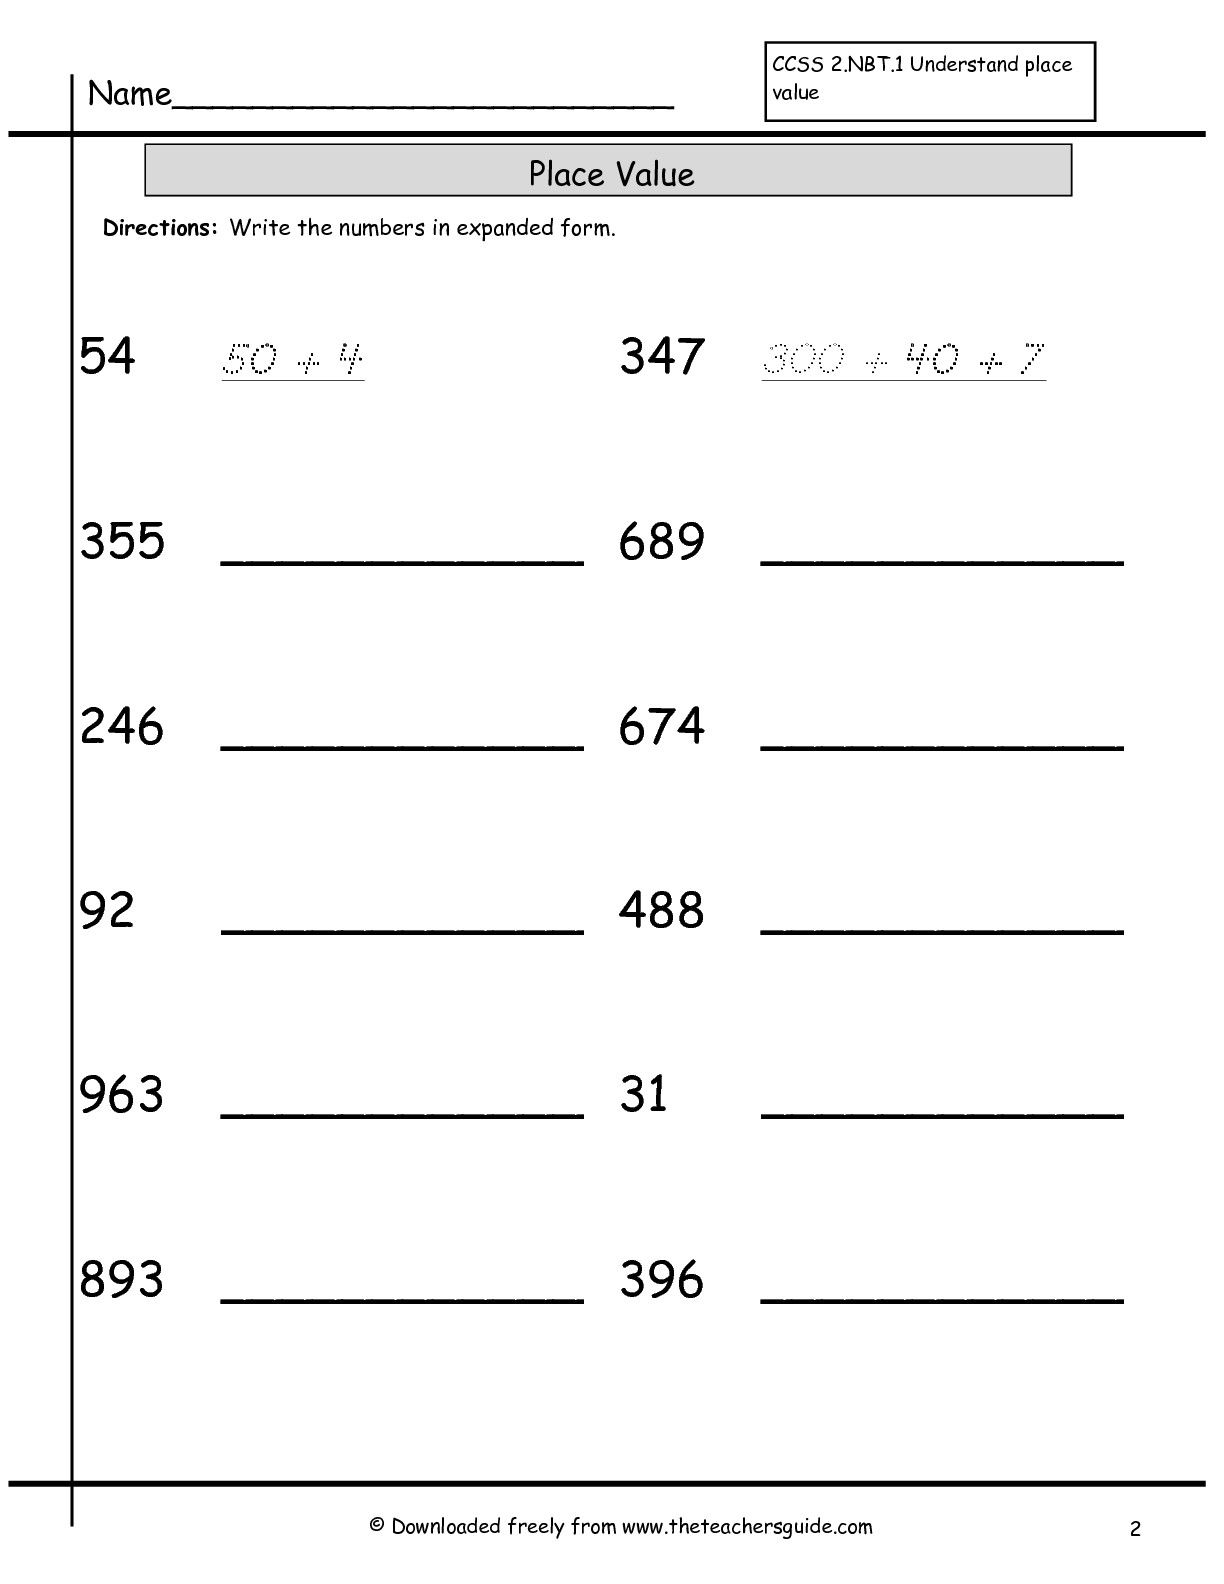 Writing Numbers In Expanded Form Worksheets For Grade 1